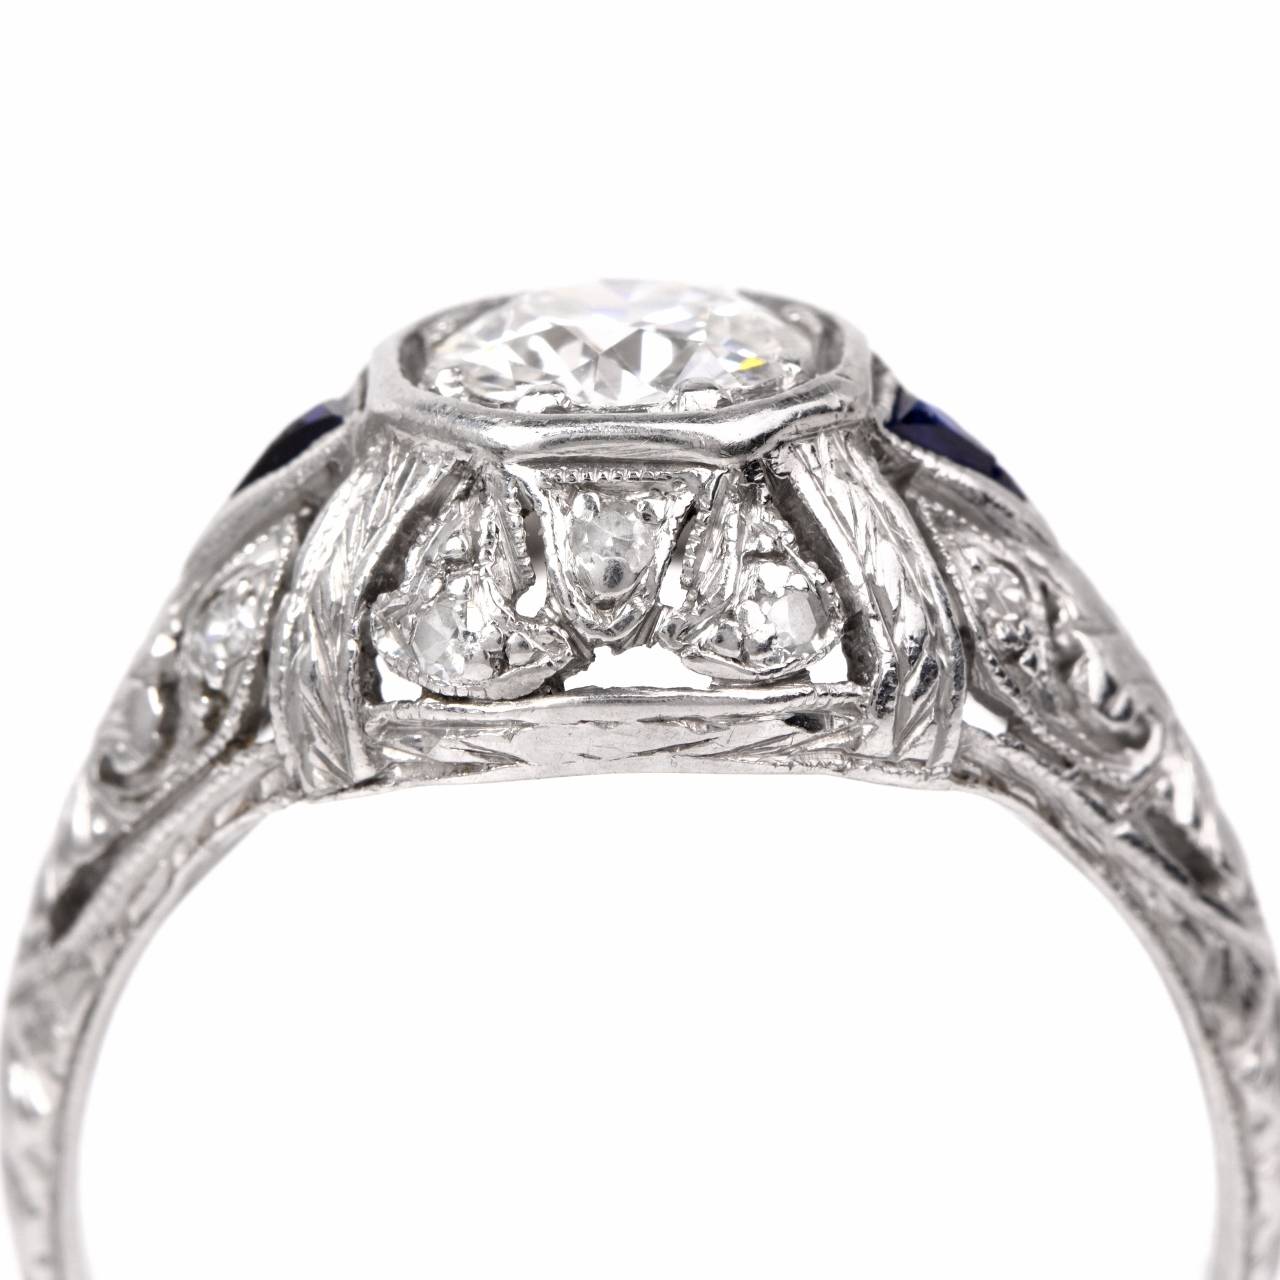 This antique  filigree engagement ring from the 1930's vintage era  is crafted in solid platinum, weighs approximately 3.9 grams and measures 4 mm high. Designed as a subtly  domed  plaque, this authentic  vintage engagement ring exposes a sparkling